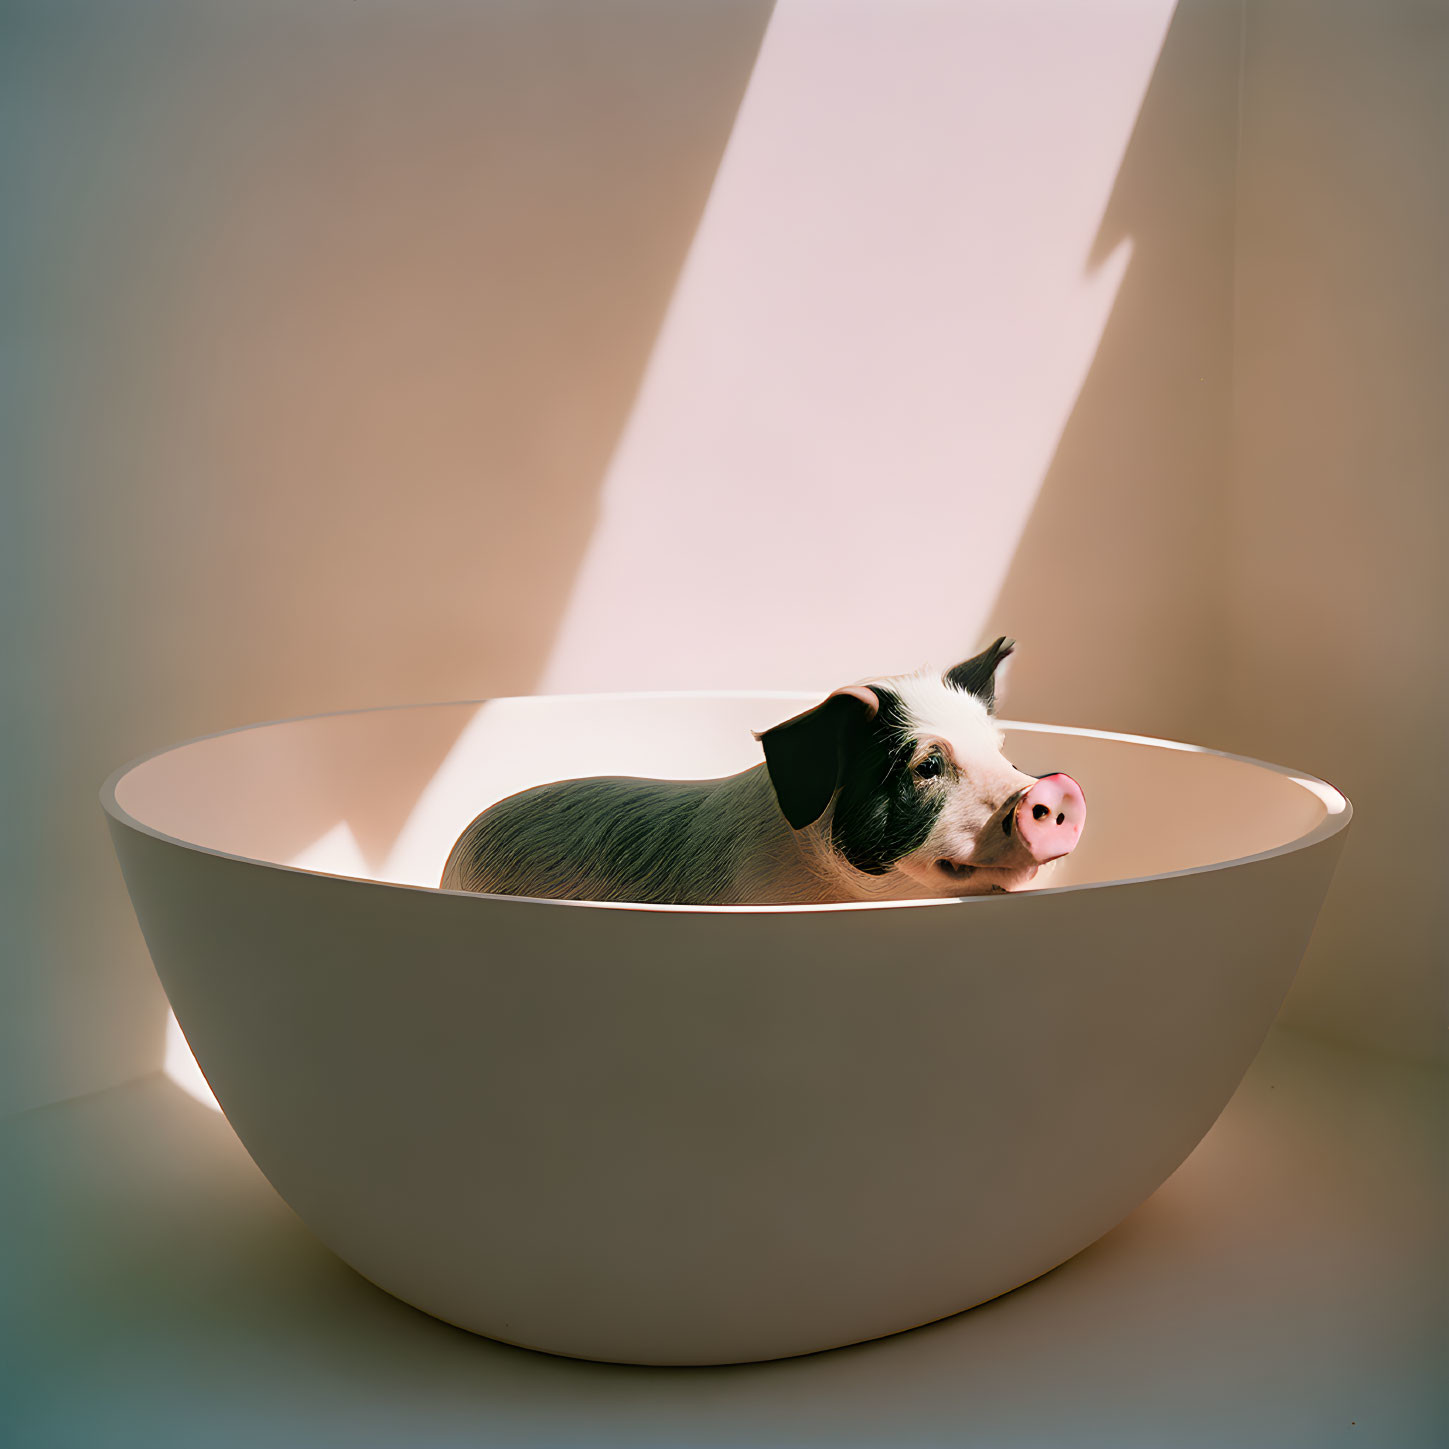 pig playing with foam in bathtub,white background,